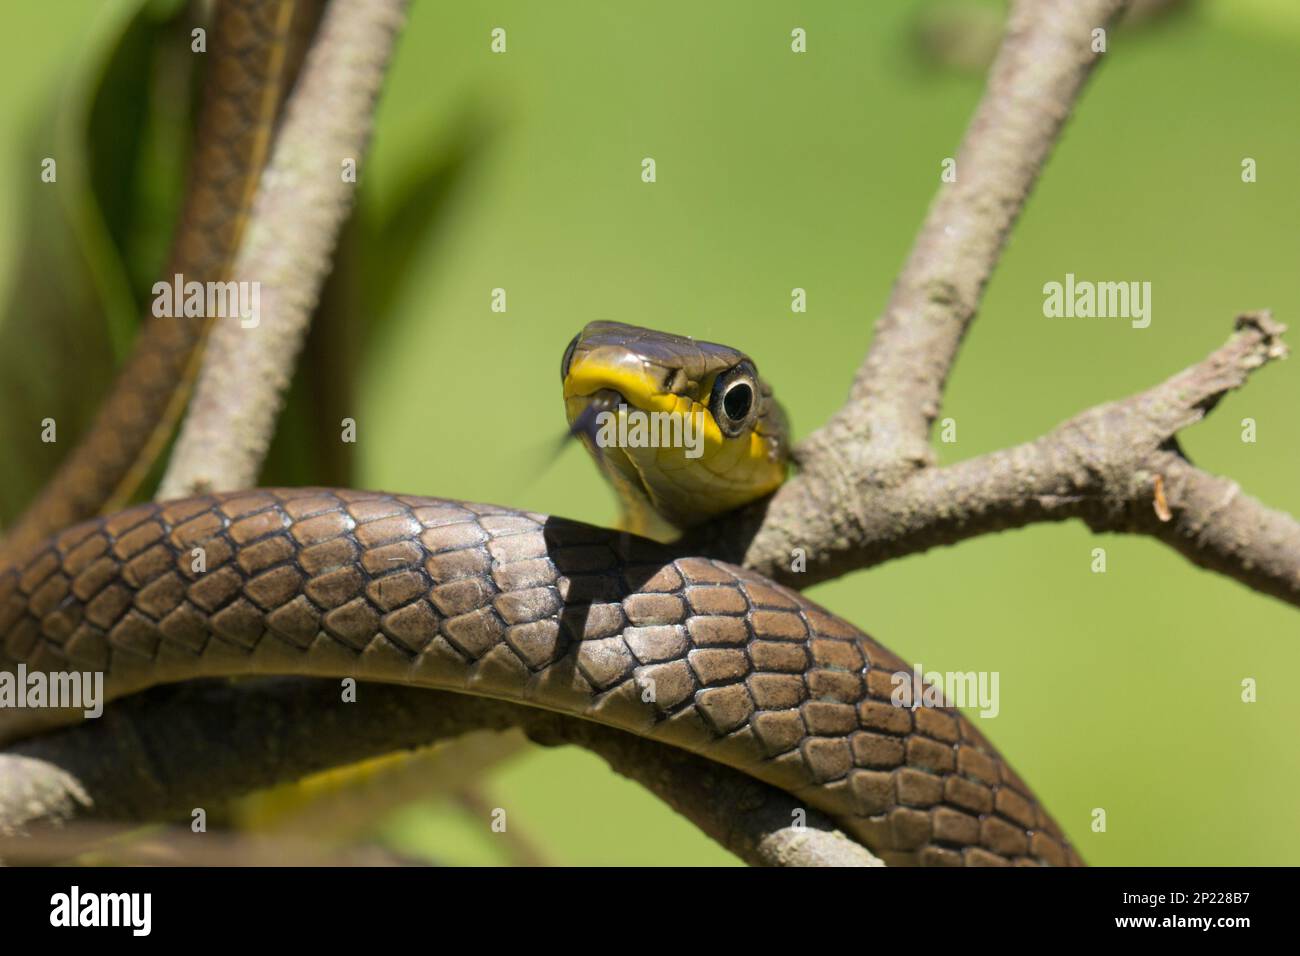 Green Tree Snake juvinile with tongue out showing a light brown colouration.Dendrelaphis punctulata Bundaberg Queensland Australia Stock Photo